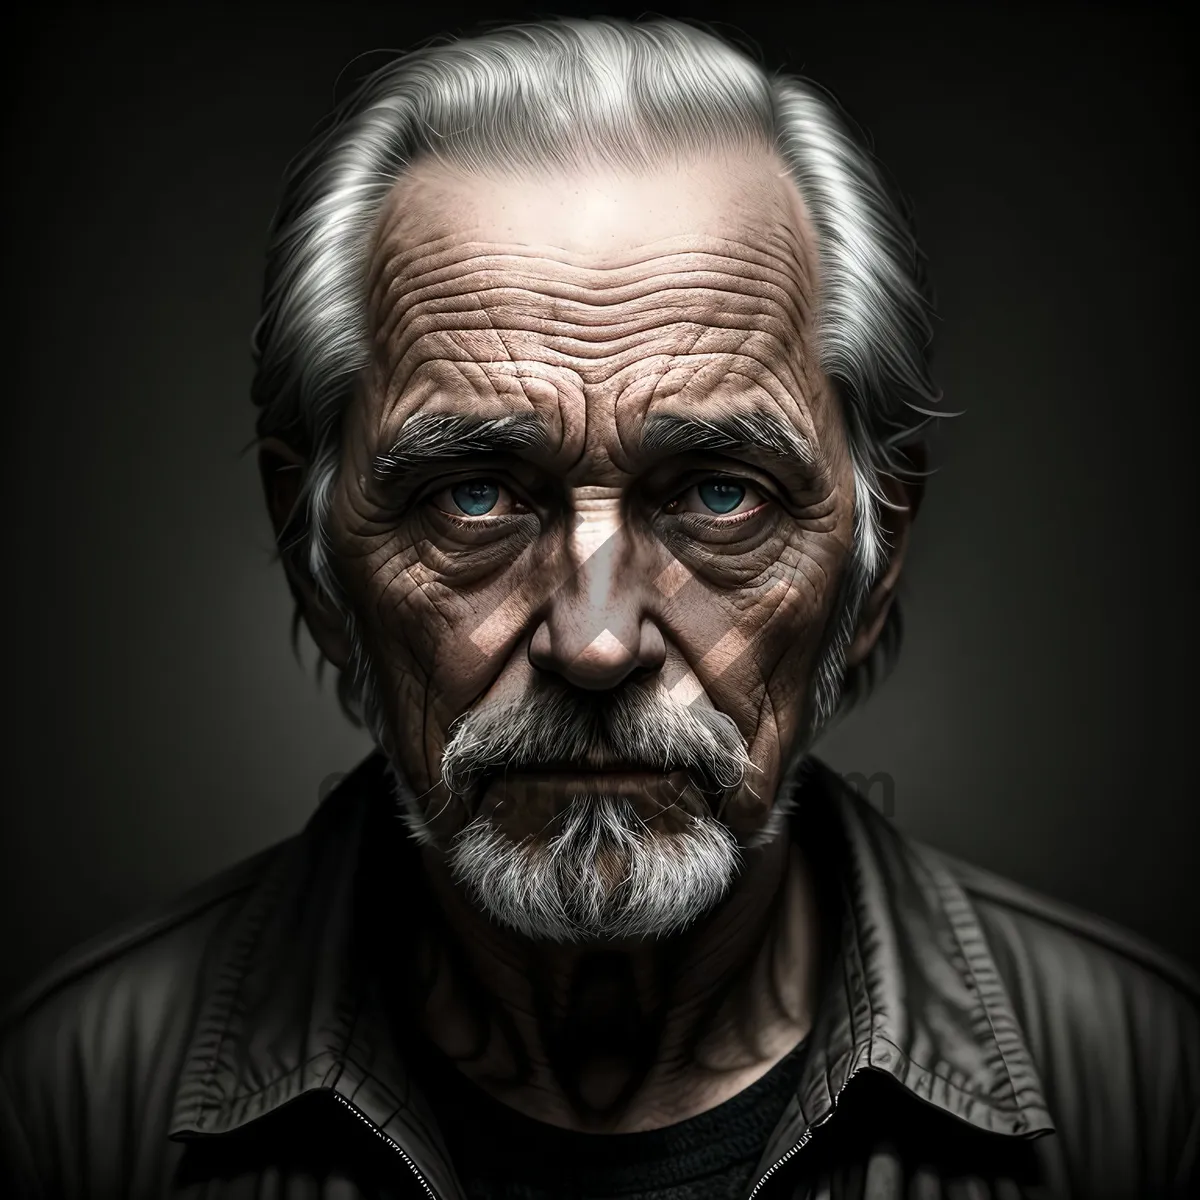 Picture of Serious elderly man with expressive gaze